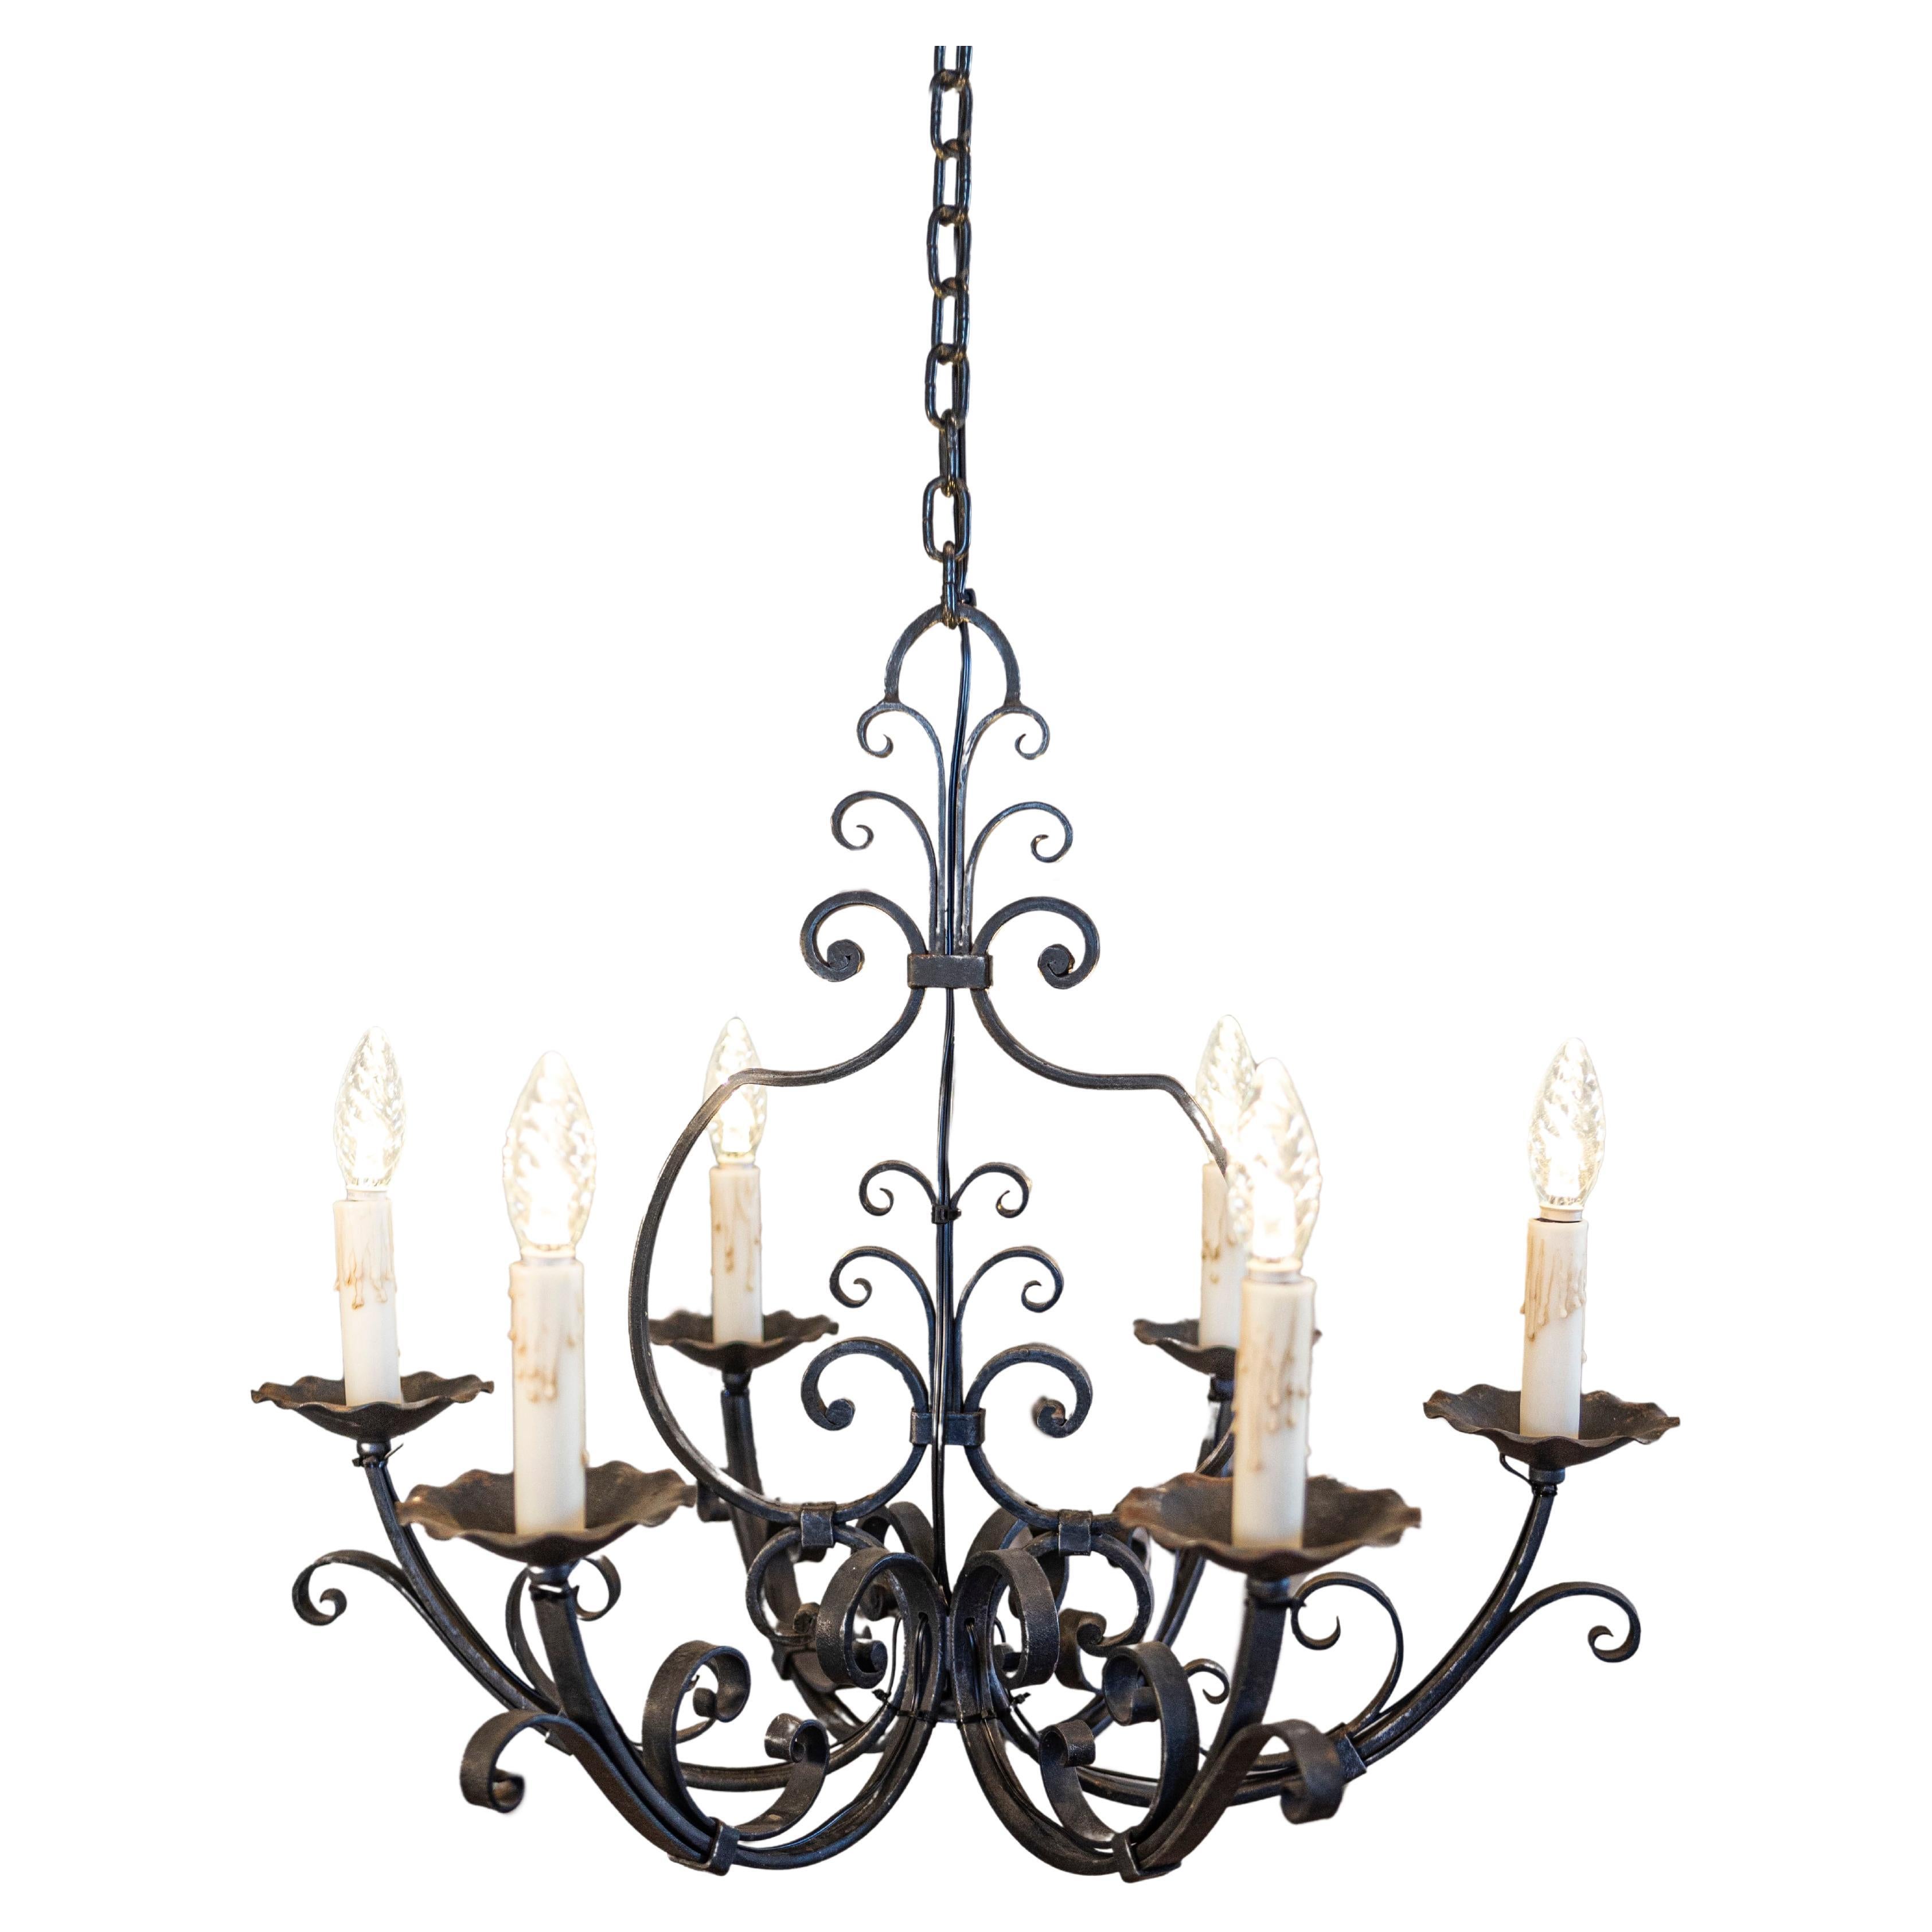 French Six Light Wrought Iron Chandelier with Cascading Scrolls, USA Wired For Sale